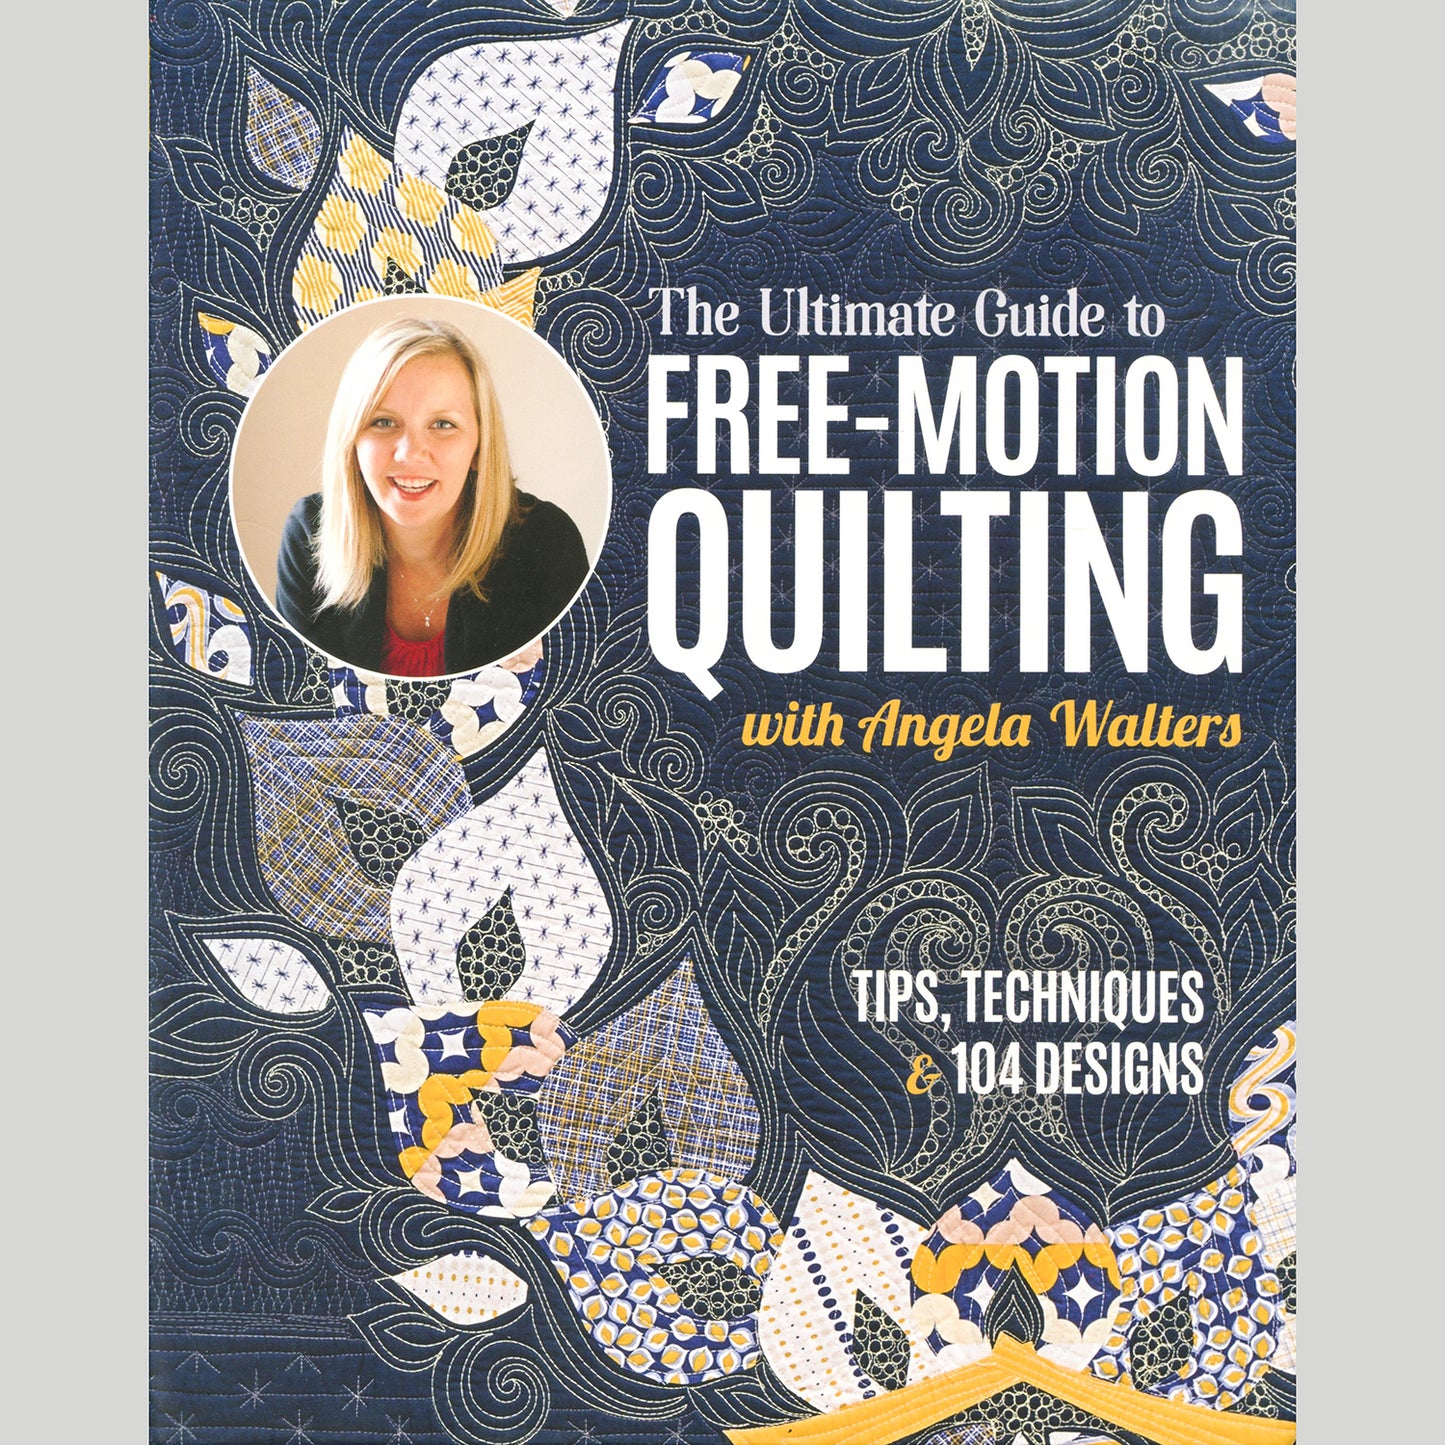 The Ultimate Guide to Free-Motion Quilting with Angela Walters Book Primary Image